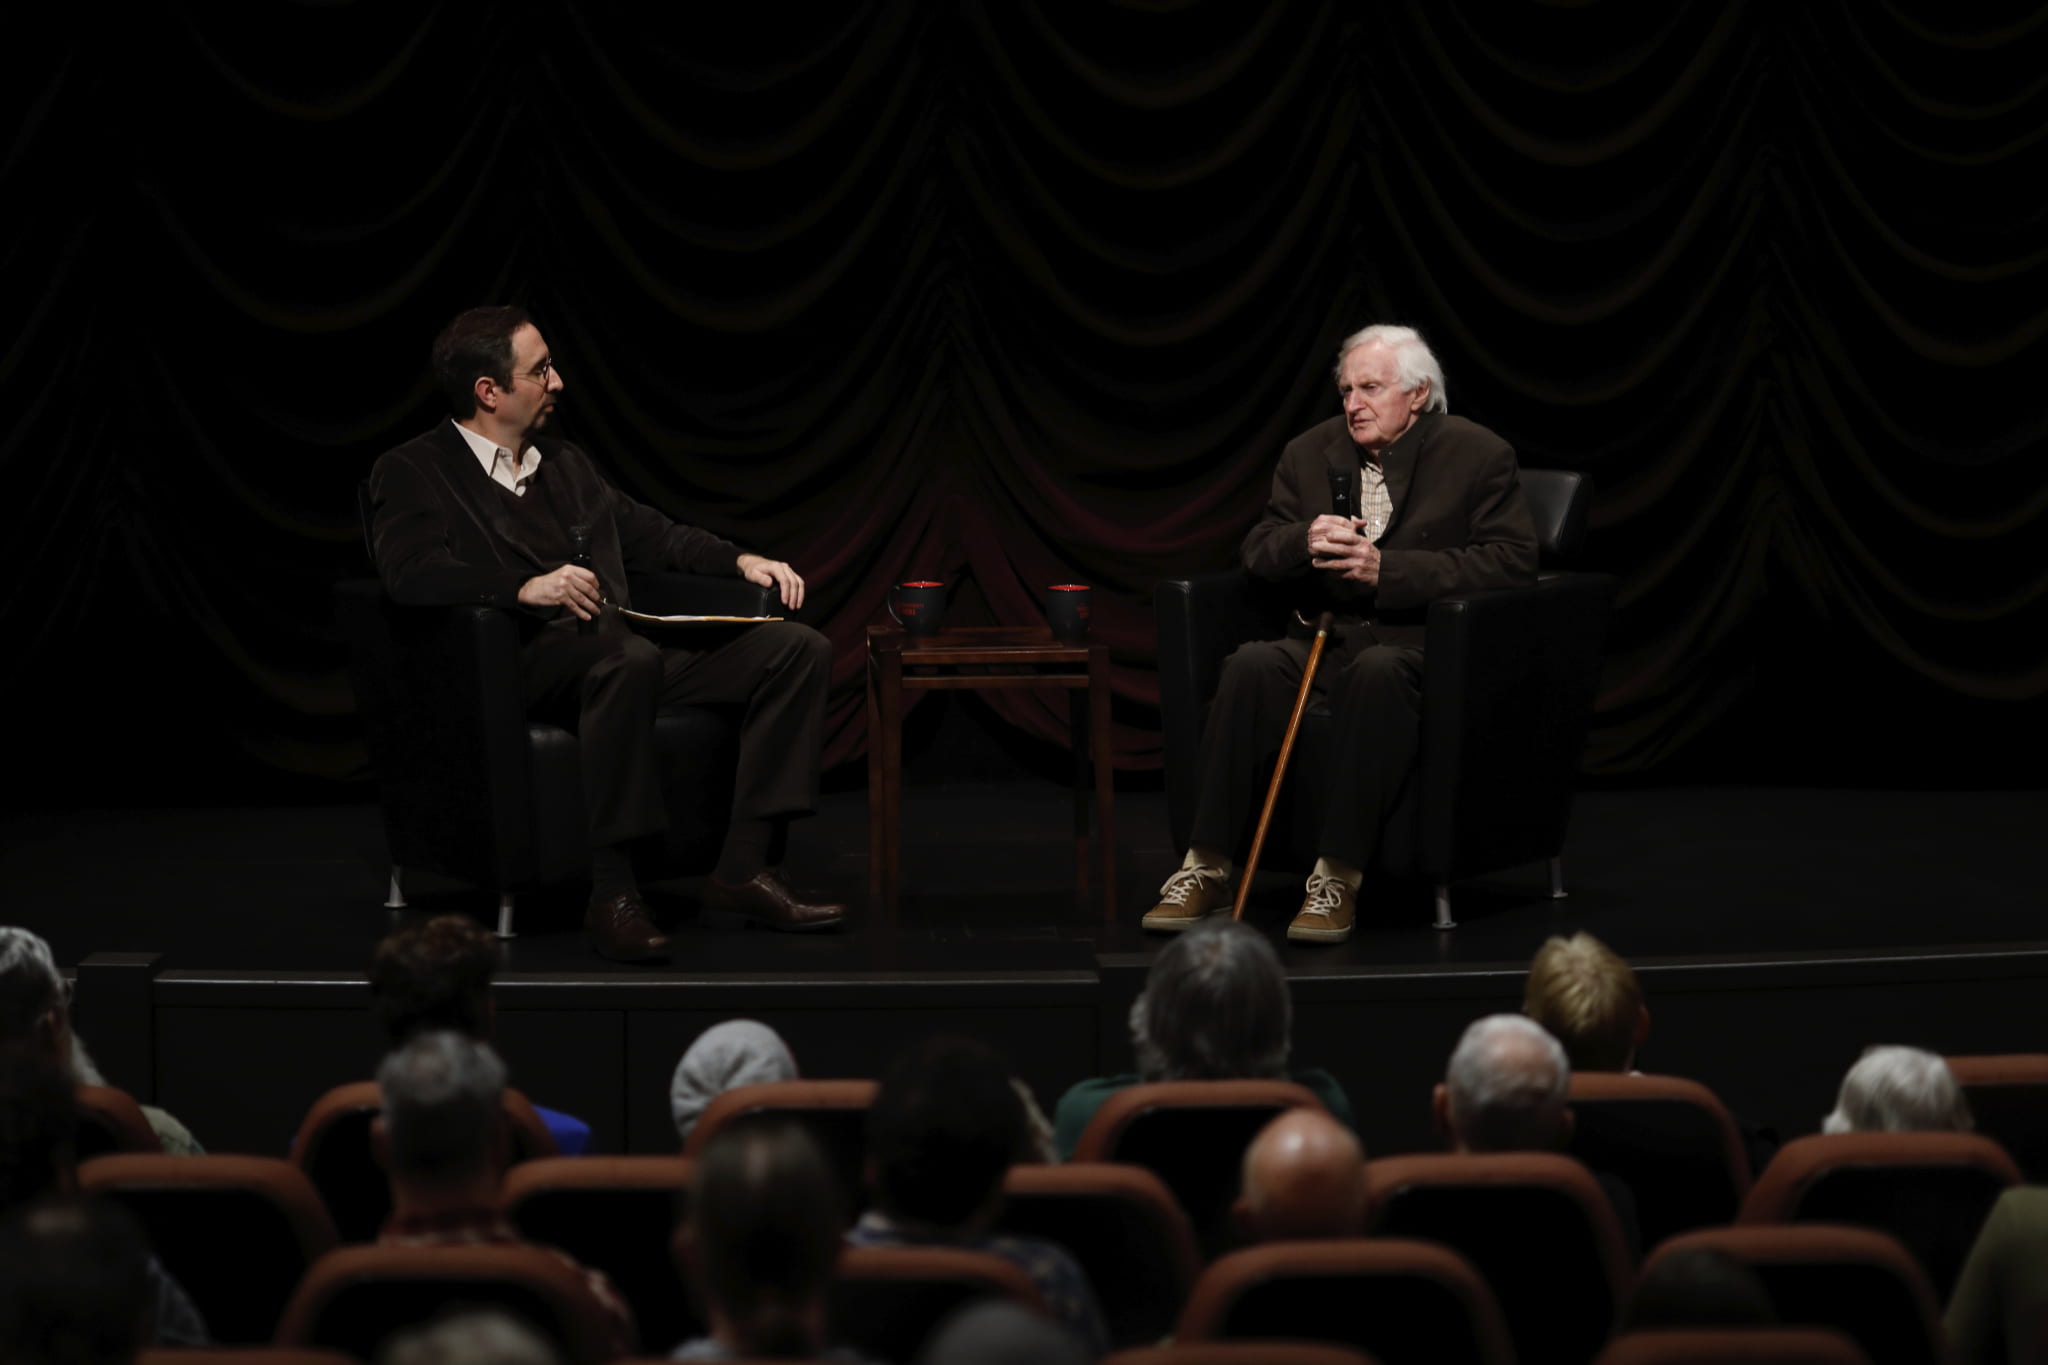 Craig Simpson and John Boorman on-stage during Jorgensen Guest Filmmaker Lecture on October 28, 2016.